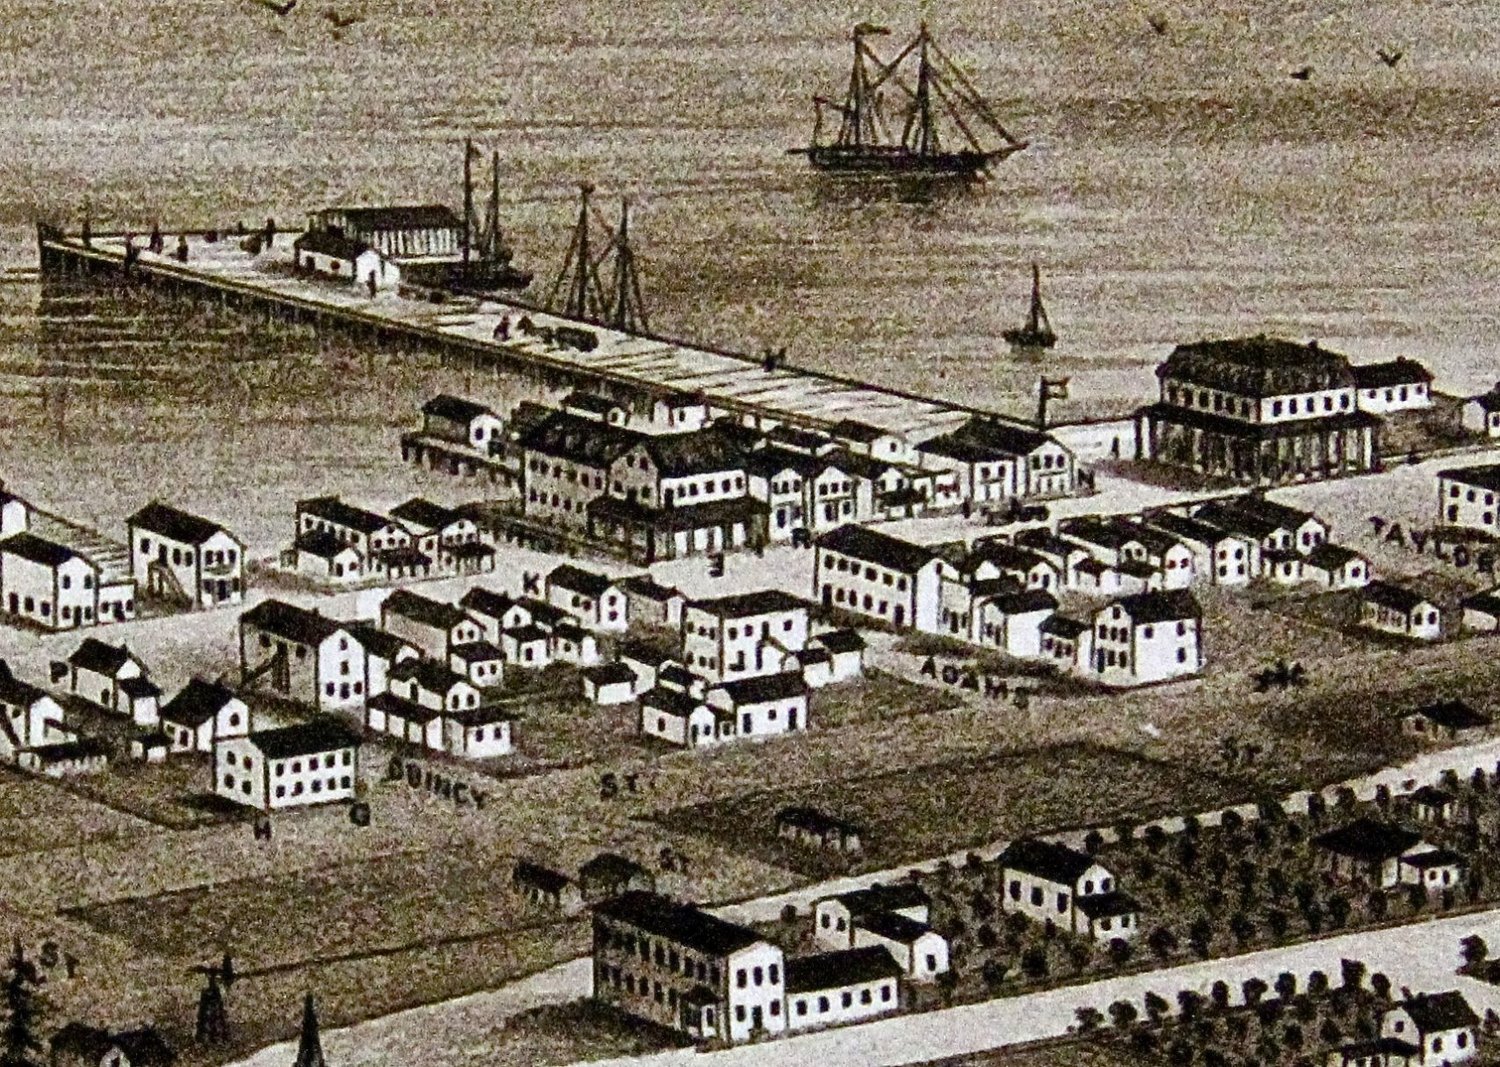 An artist's rendition of Port Townsend in 1876 shows the square, flat-topped Fowler Building on Adams St. surrounded by a wooden village. Fowler's building was the only stone structure.